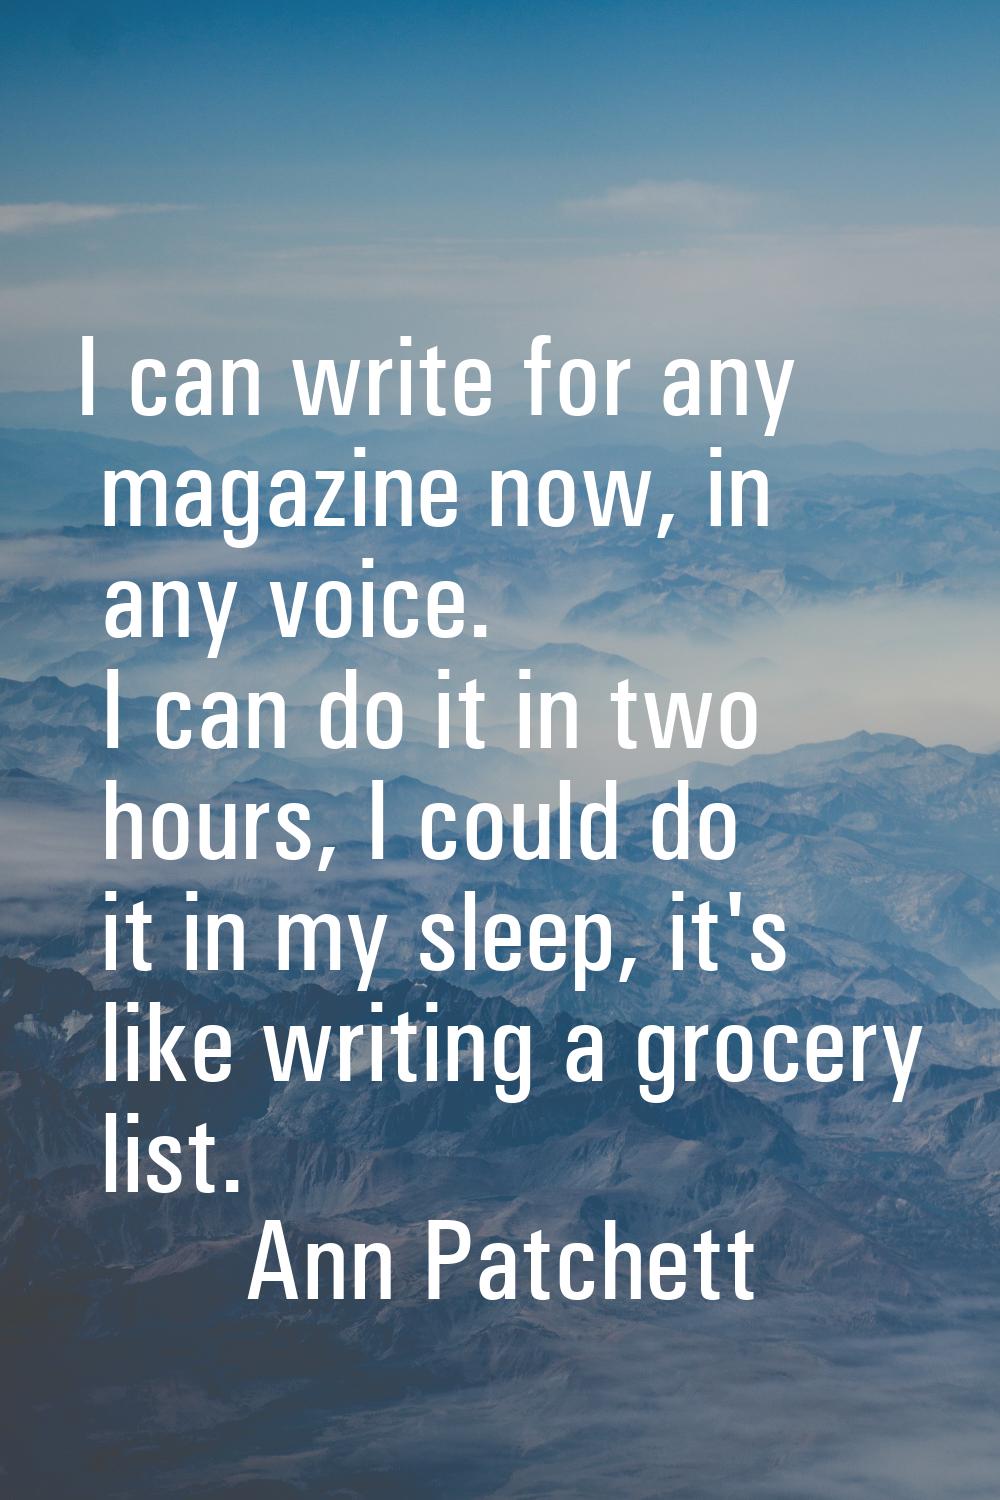 I can write for any magazine now, in any voice. I can do it in two hours, I could do it in my sleep